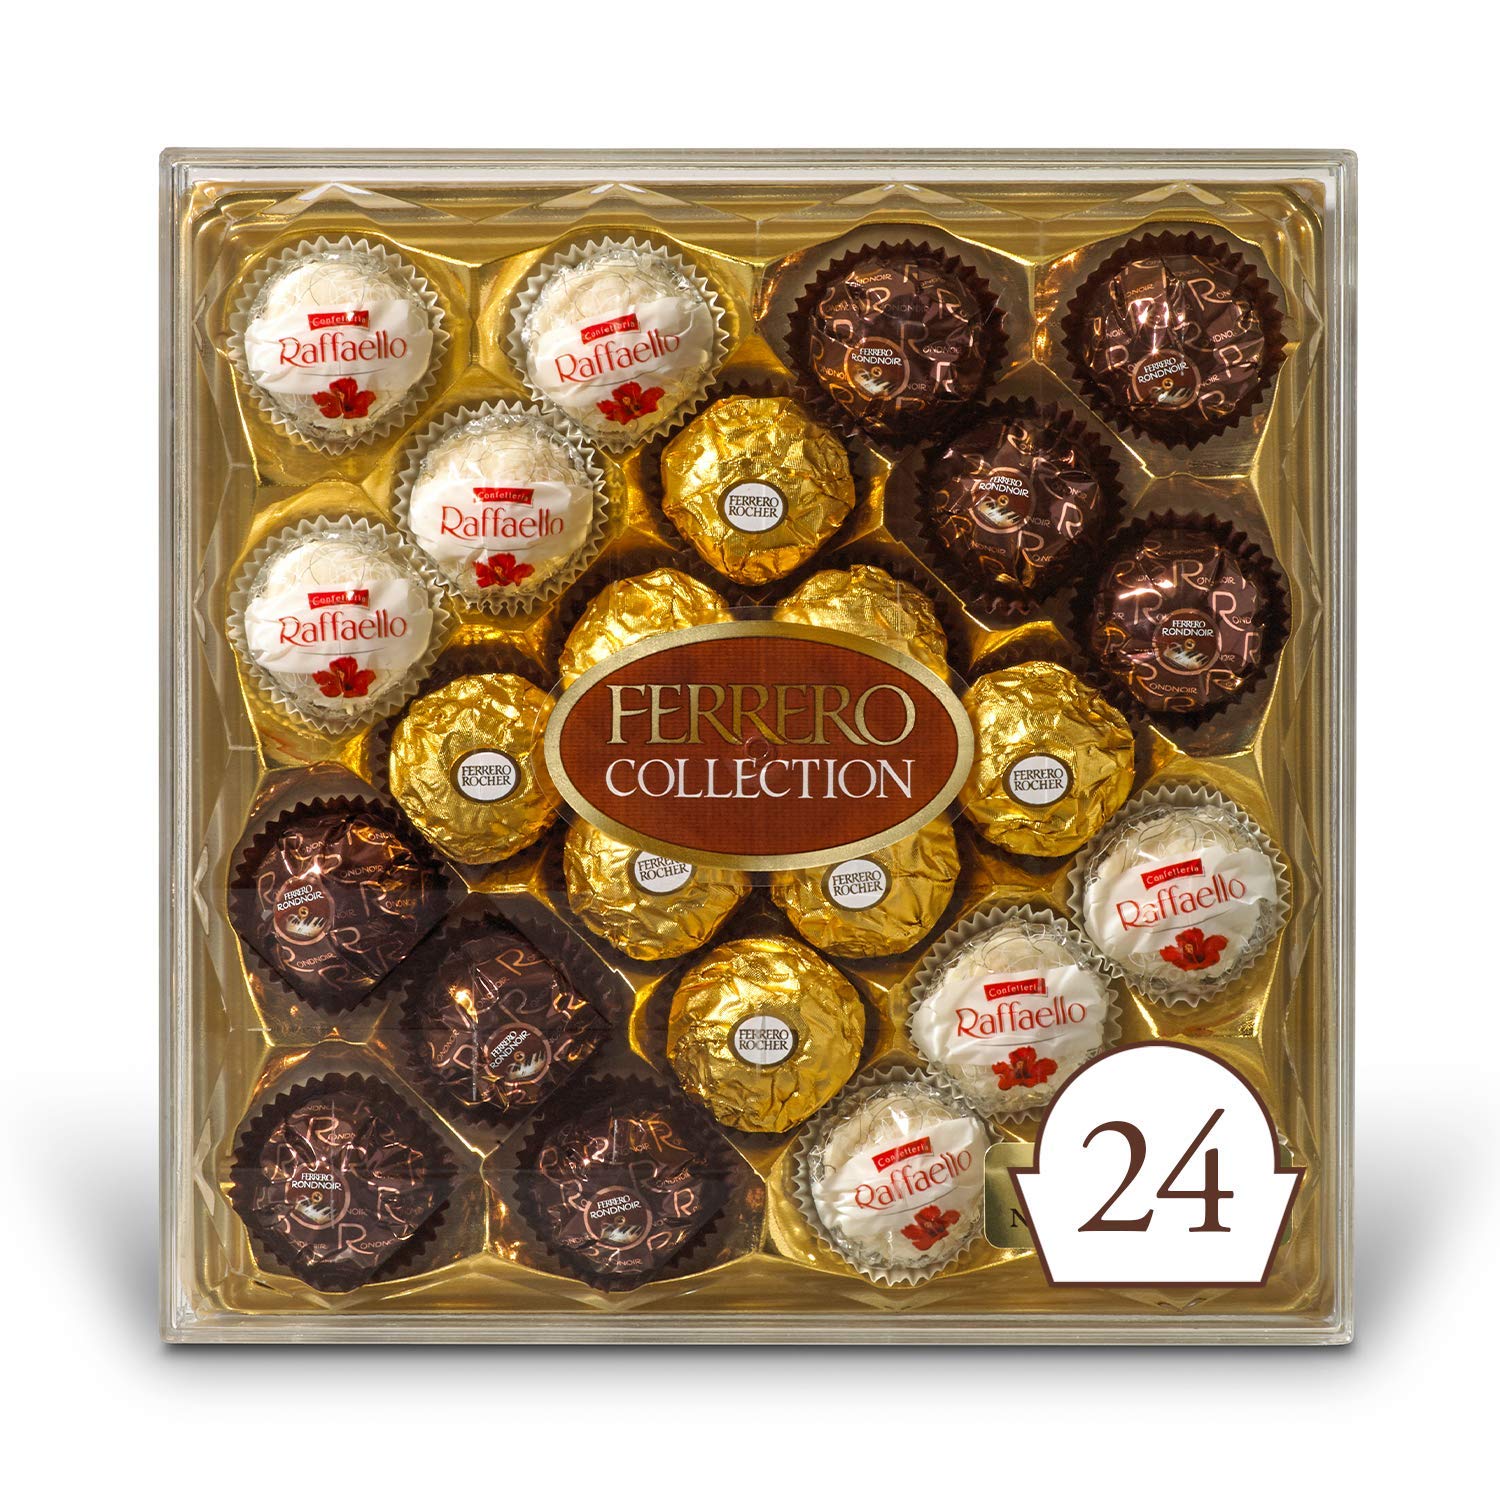 Ferrero Rocher Collection, Fine Hazelnut Milk Chocolates, 24 Count, Gift Box, Assorted Coconut Candy and Chocolates | Stocking Stuffer For Chocolate Lovers | Amazon Stocking Stuffers | Stocking stuffers For Adults | stocking stuffers for men | mens stocking stuffers | Stocking stuffers for her | Stocking stuffers for guys | Cheap stocking stuffers | Best stocking stuffers | Stocking stuffers for wife | stocking stuffer gifts | Best stocking stuffers